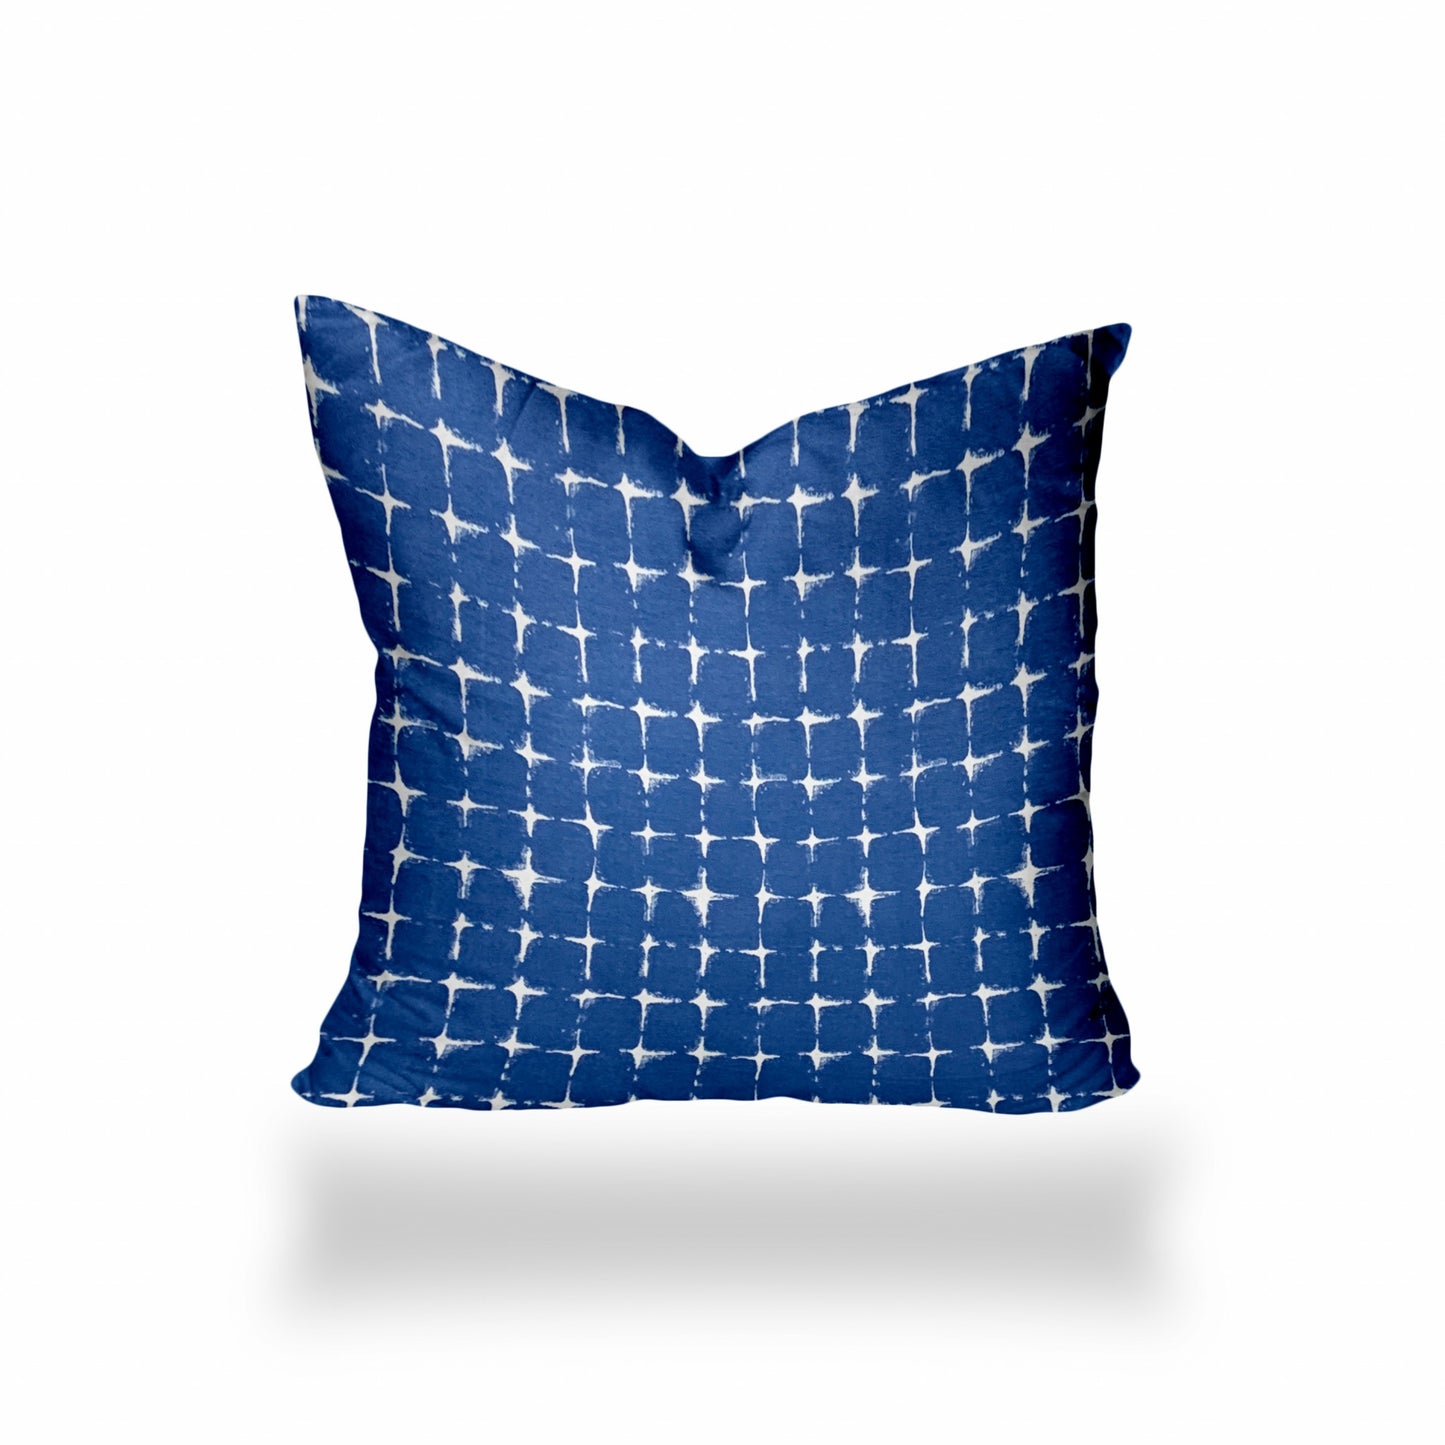 20" X 20" Blue And White Enveloped Gingham Throw Indoor Outdoor Pillow Cover